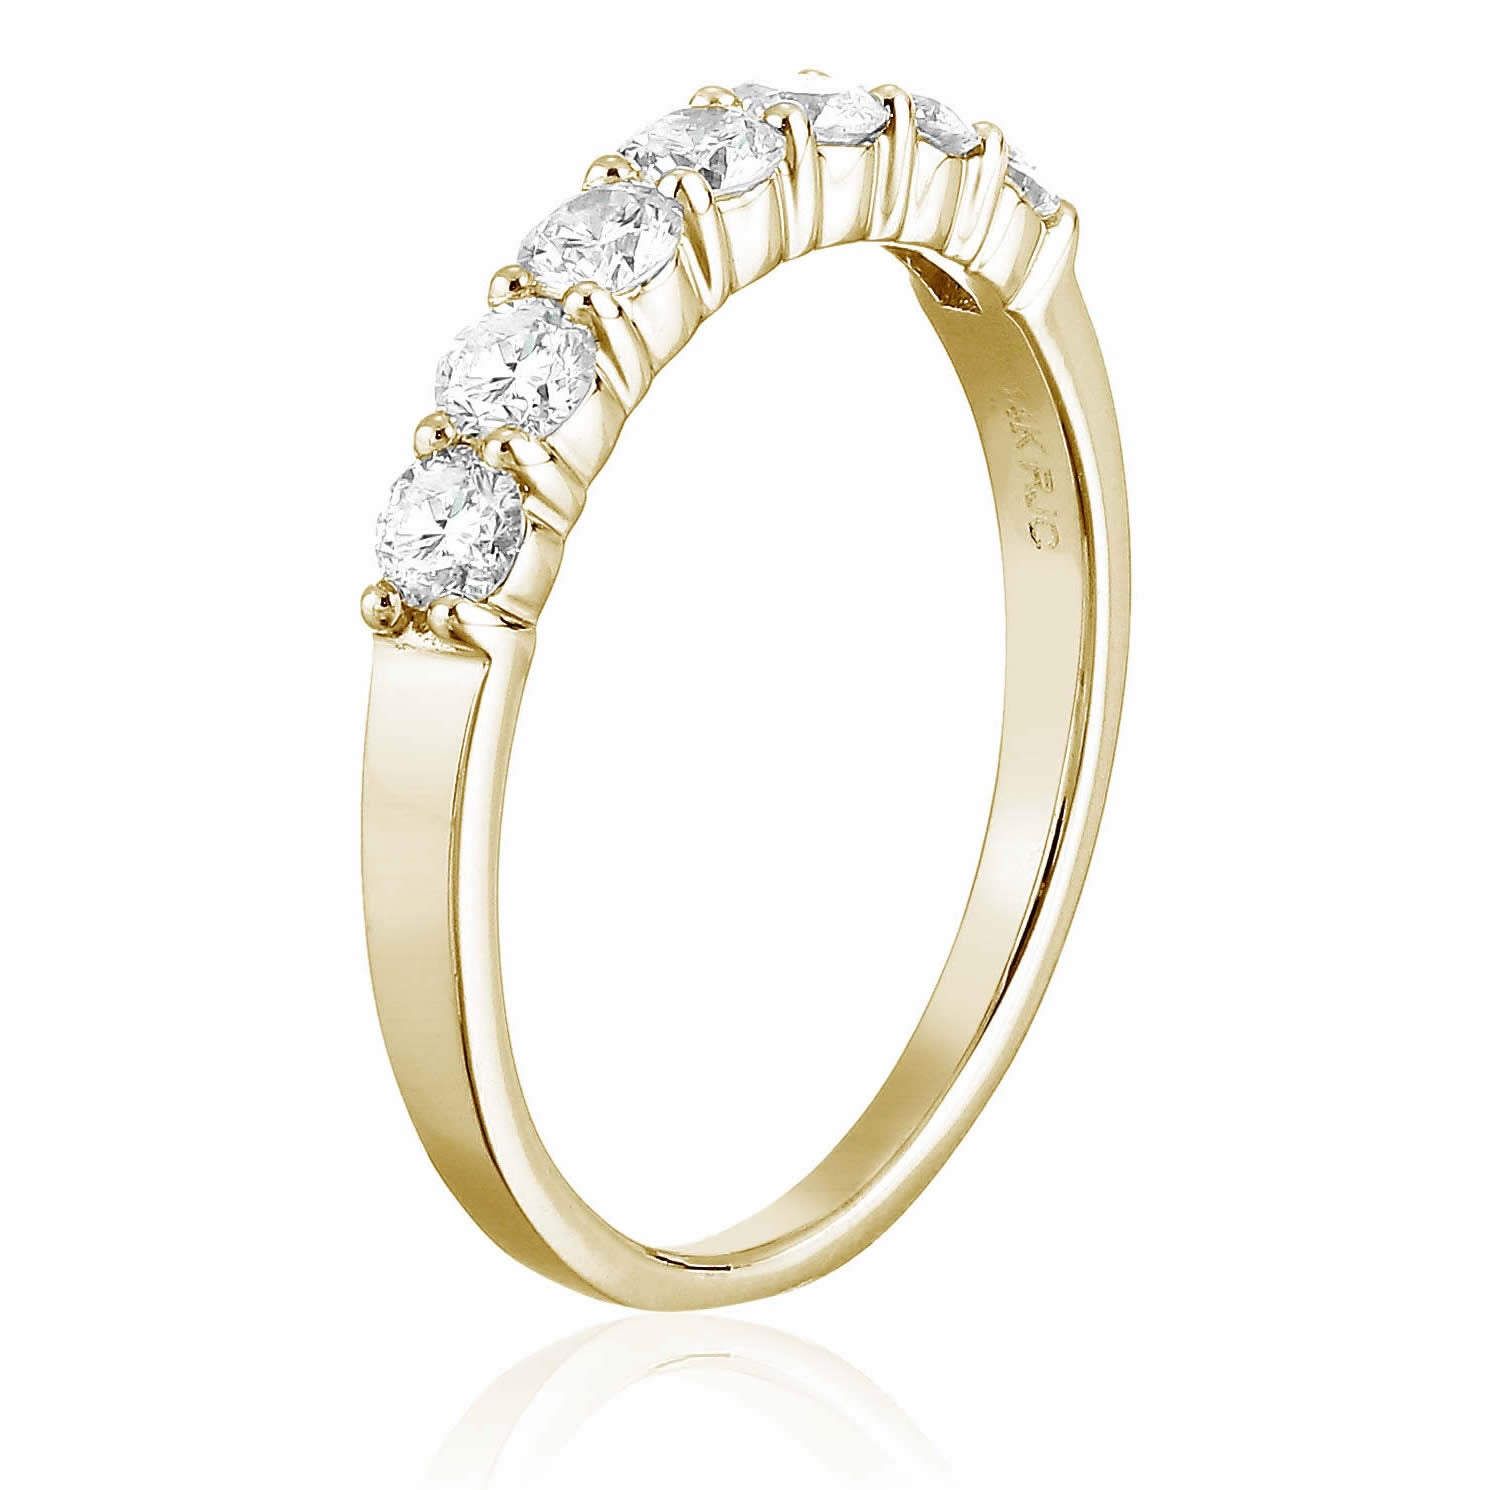 1/2 cttw Round Diamond Wedding Band for Women in 14K Yellow Gold Prong Set, Size 4-10